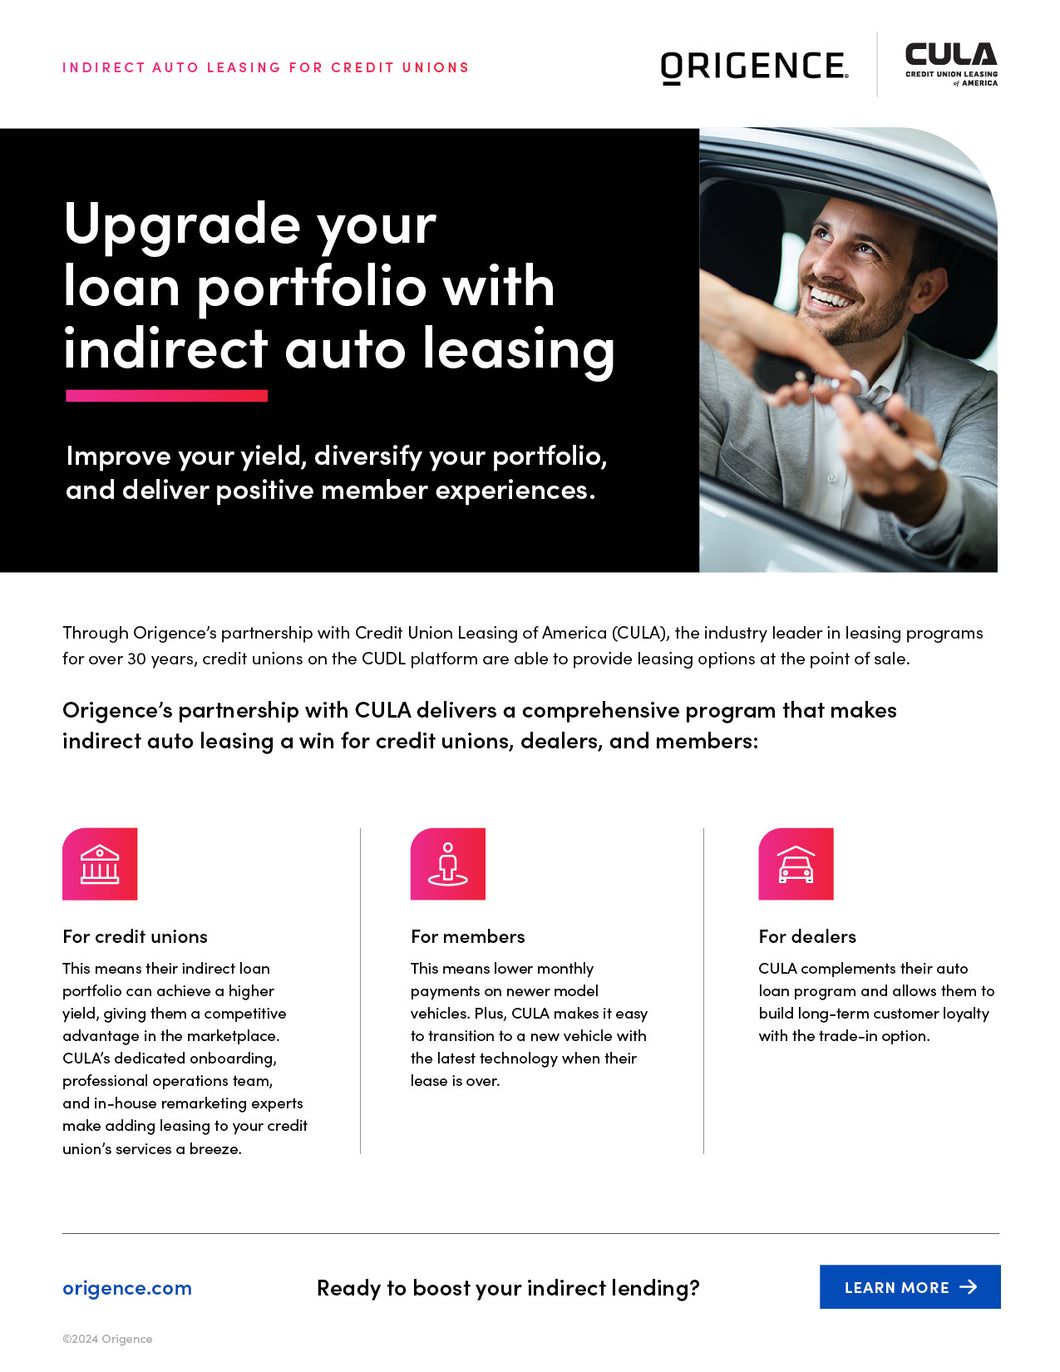 Auto Leasing from CULA Sales Sheet (Credit Unions)